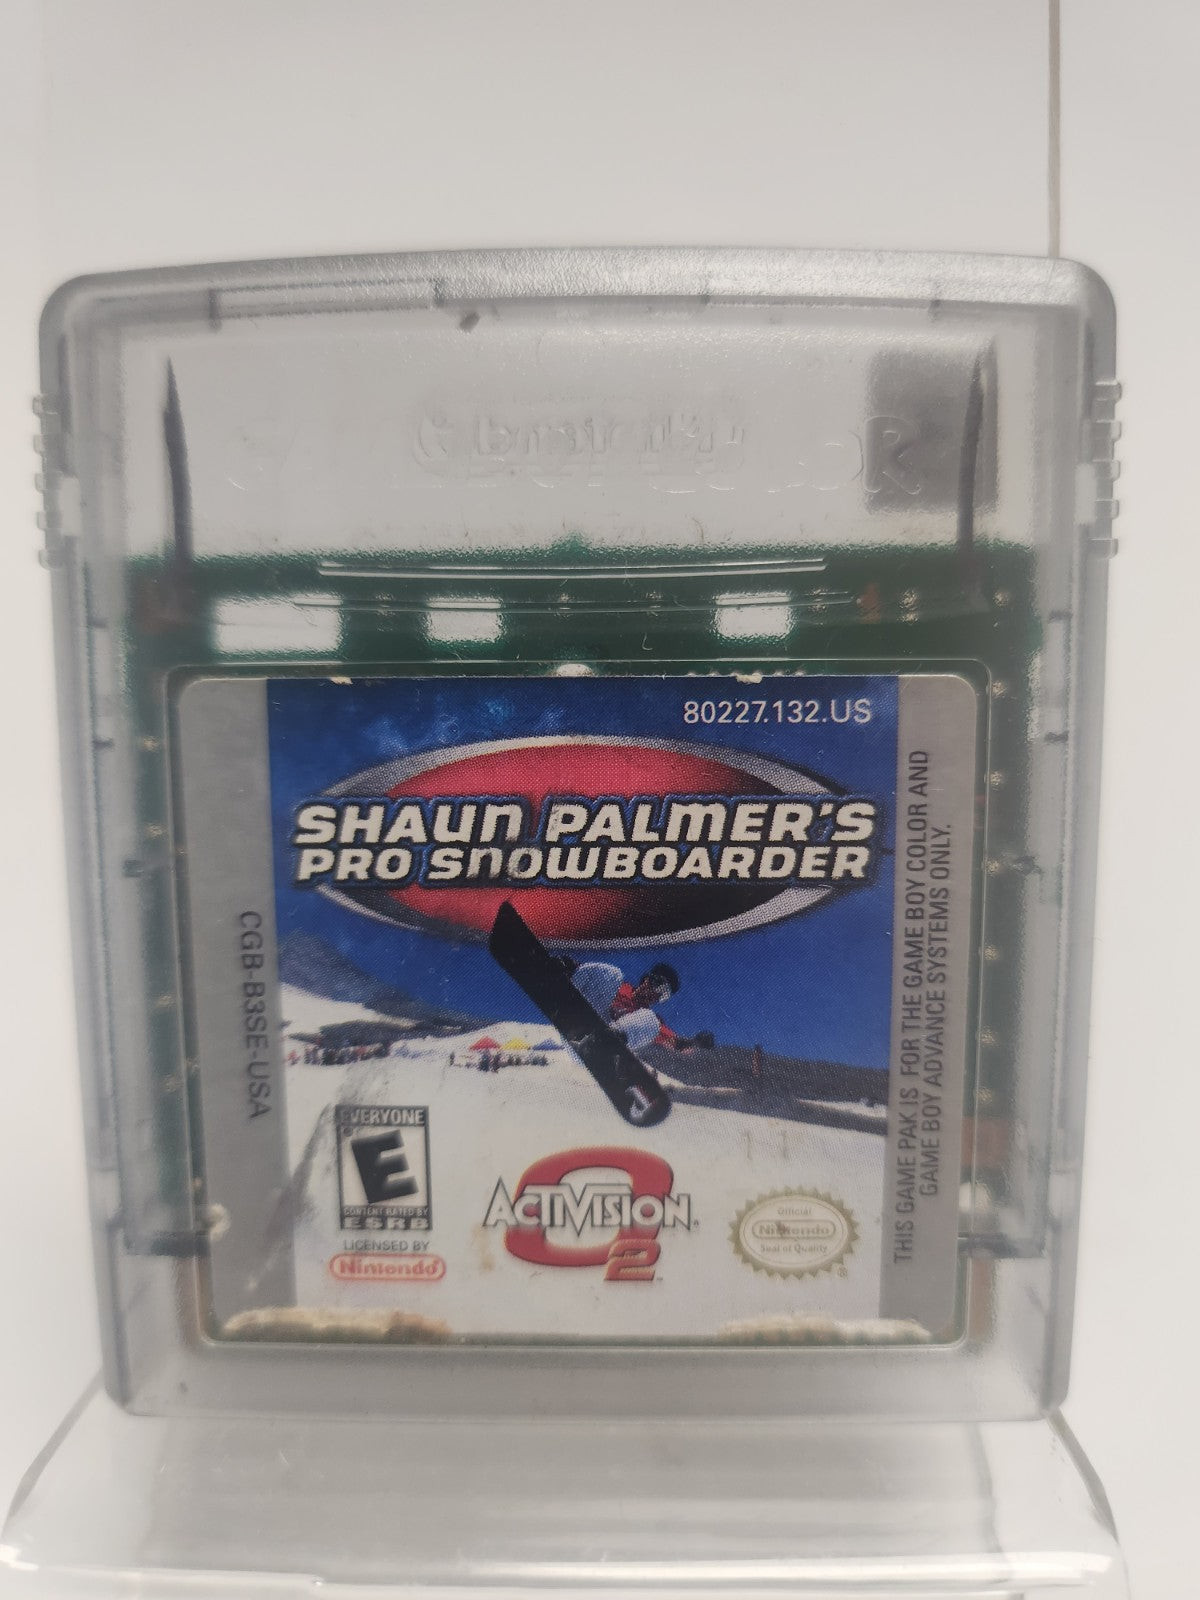 Shaun Palmers Pro Snowboarder Game Boy Color